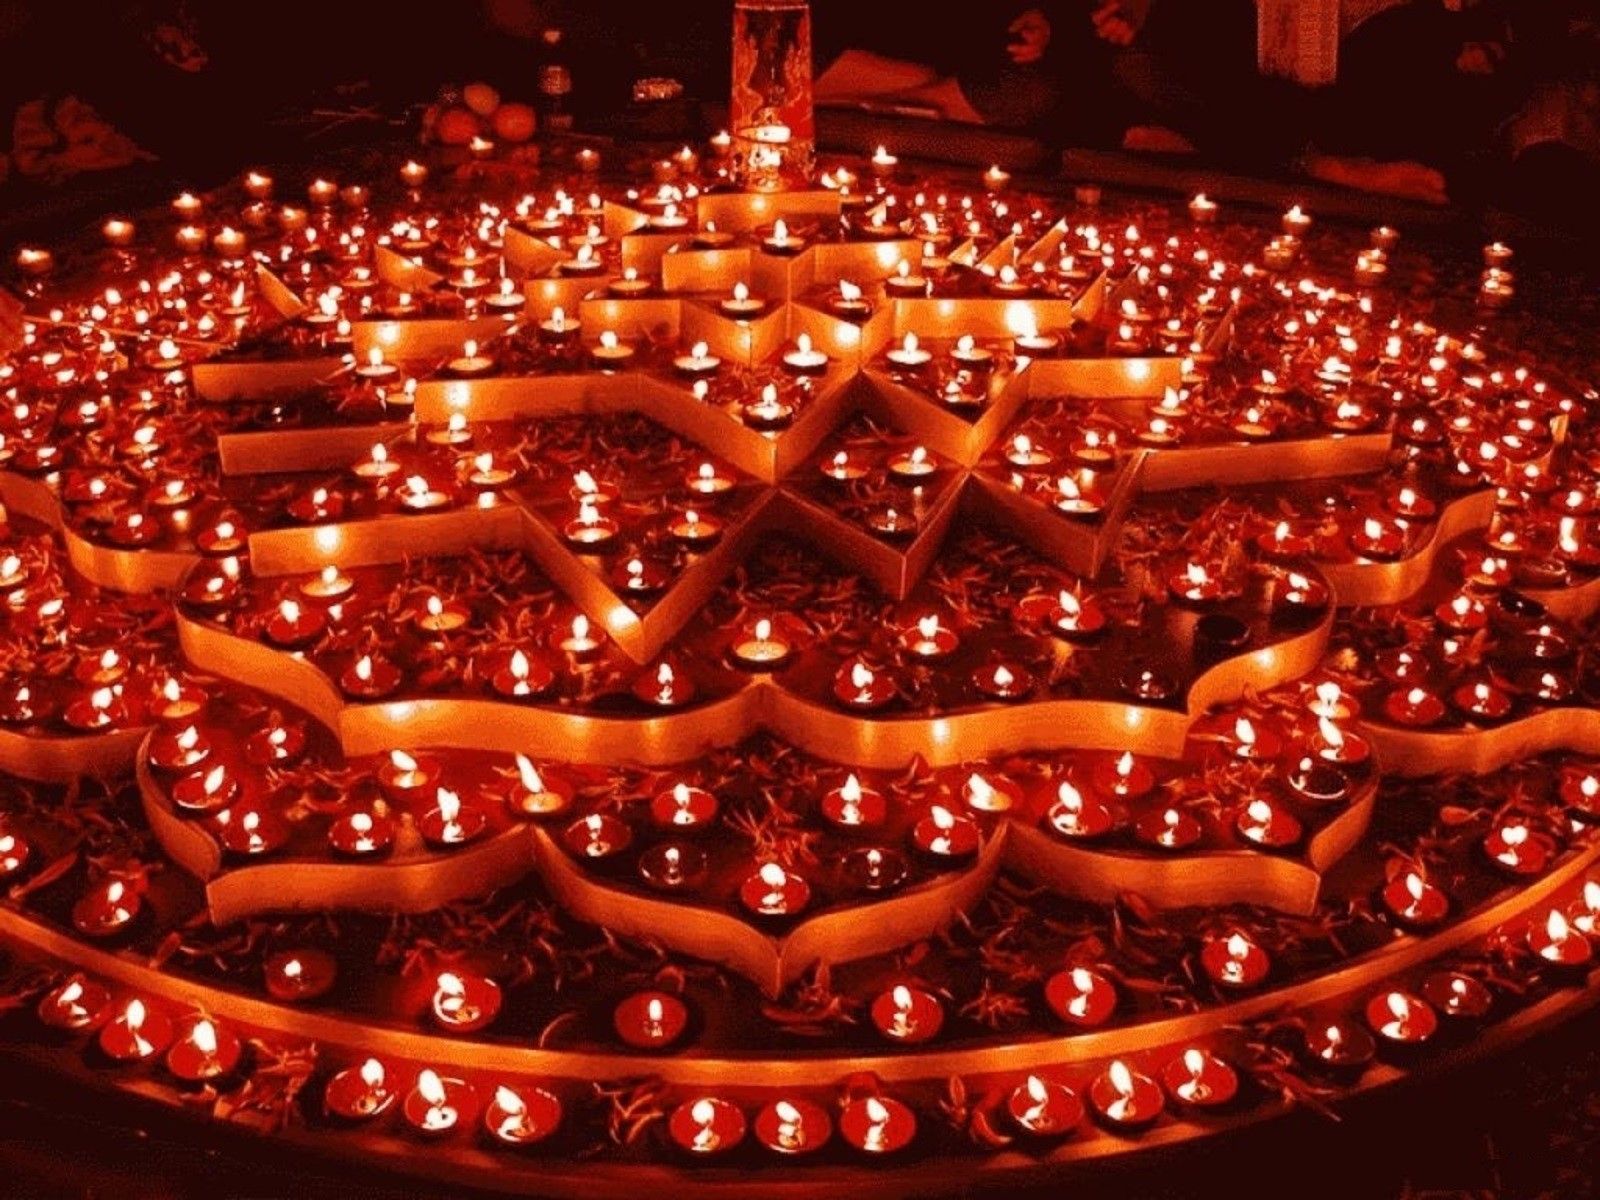 Indian Festival Diwali Large Collection of Diya and Decoration